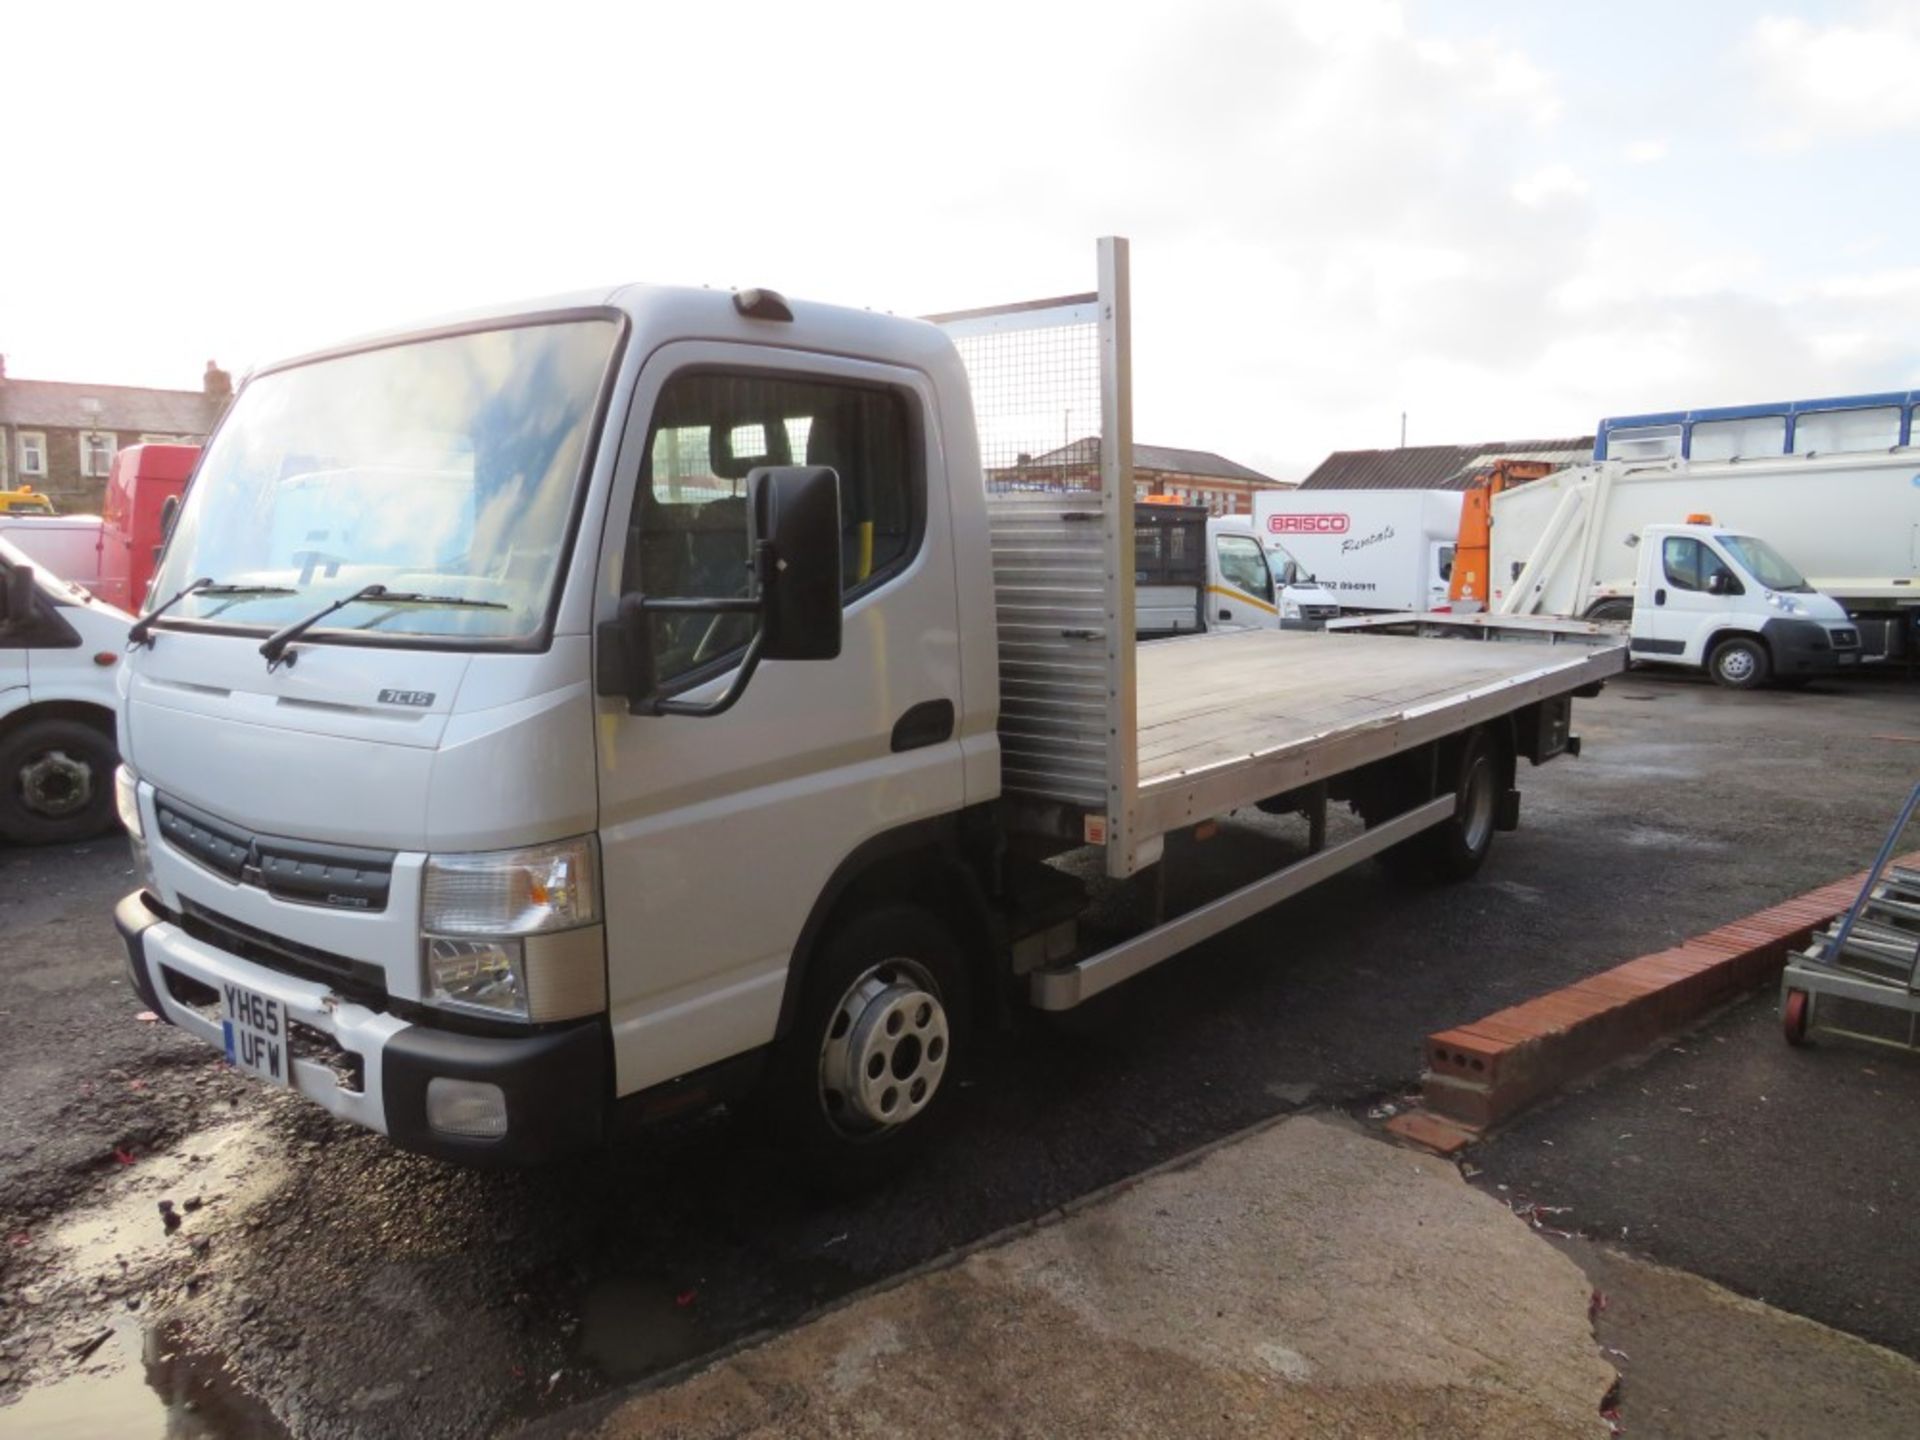 65 reg MITSUBISHI FUSO CANTER 7C15 43 FLAT BED, 1ST REG 09/15, 123010M, V5 HERE, 1 OWNER FROM NEW [ - Image 2 of 5